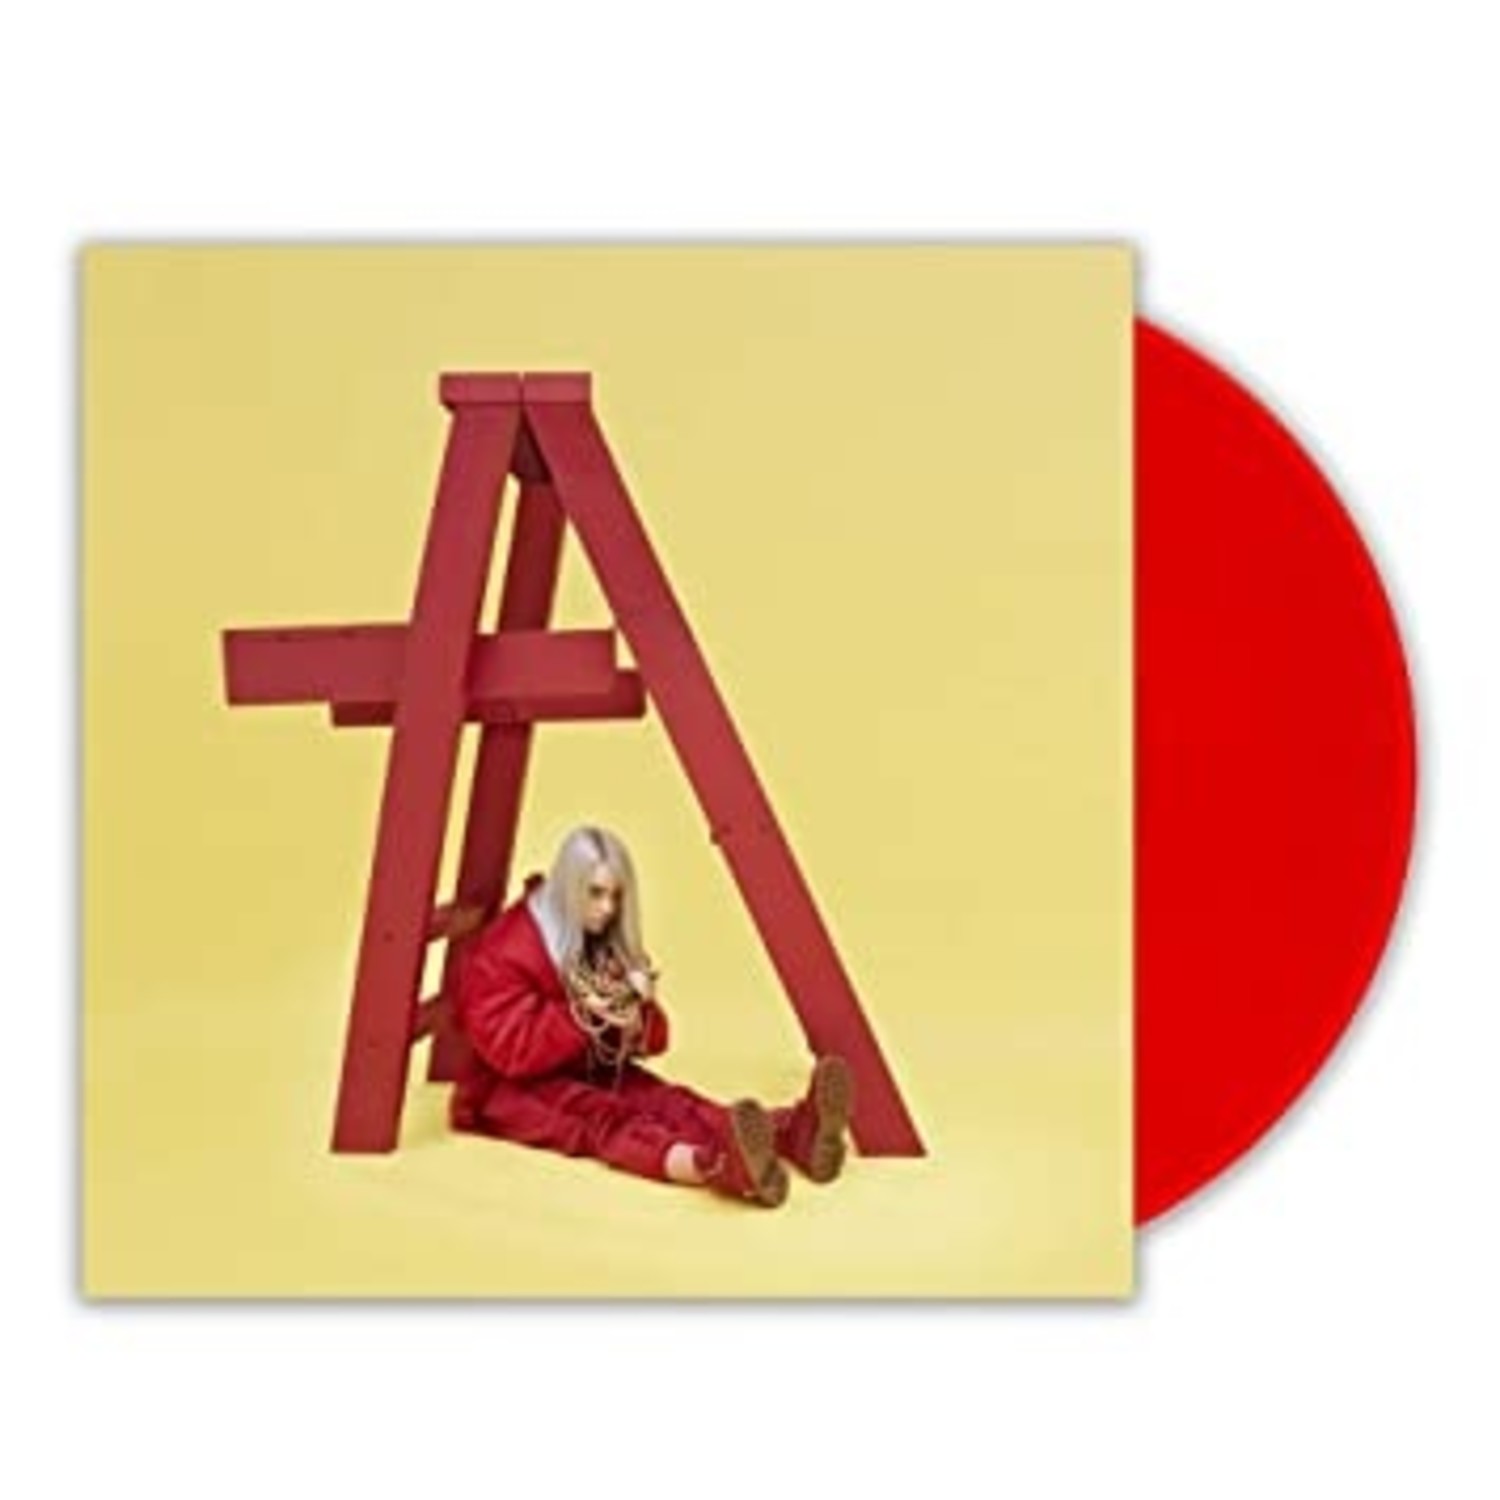 Billie Eilish: When We All Fall Asleep, Where Do We Go? and Don't Smile  at Me Vinyl Collection with Bonus Art Card